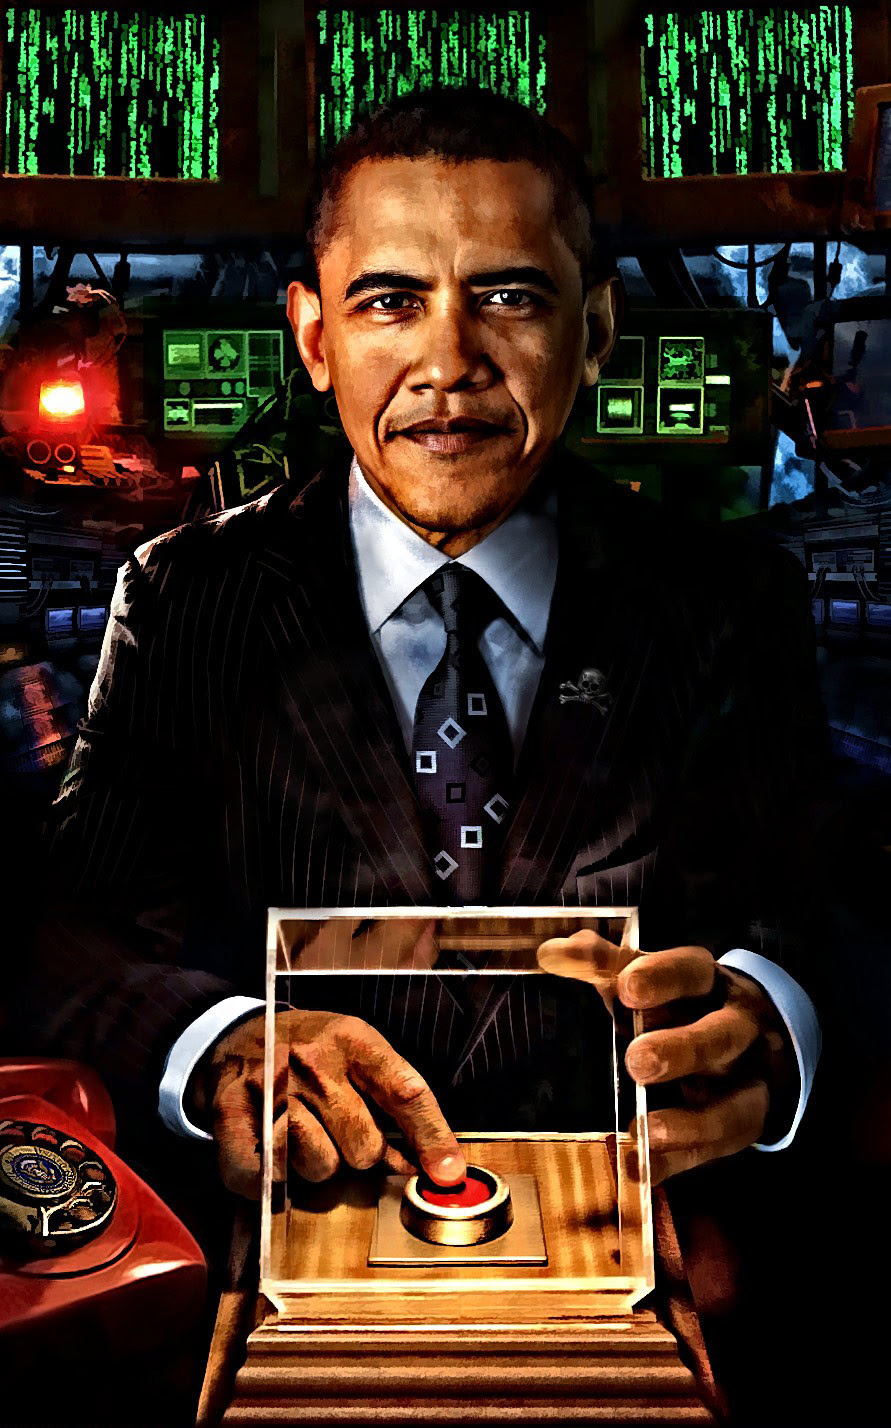 Obama, with his kill switch (credit: unknown)